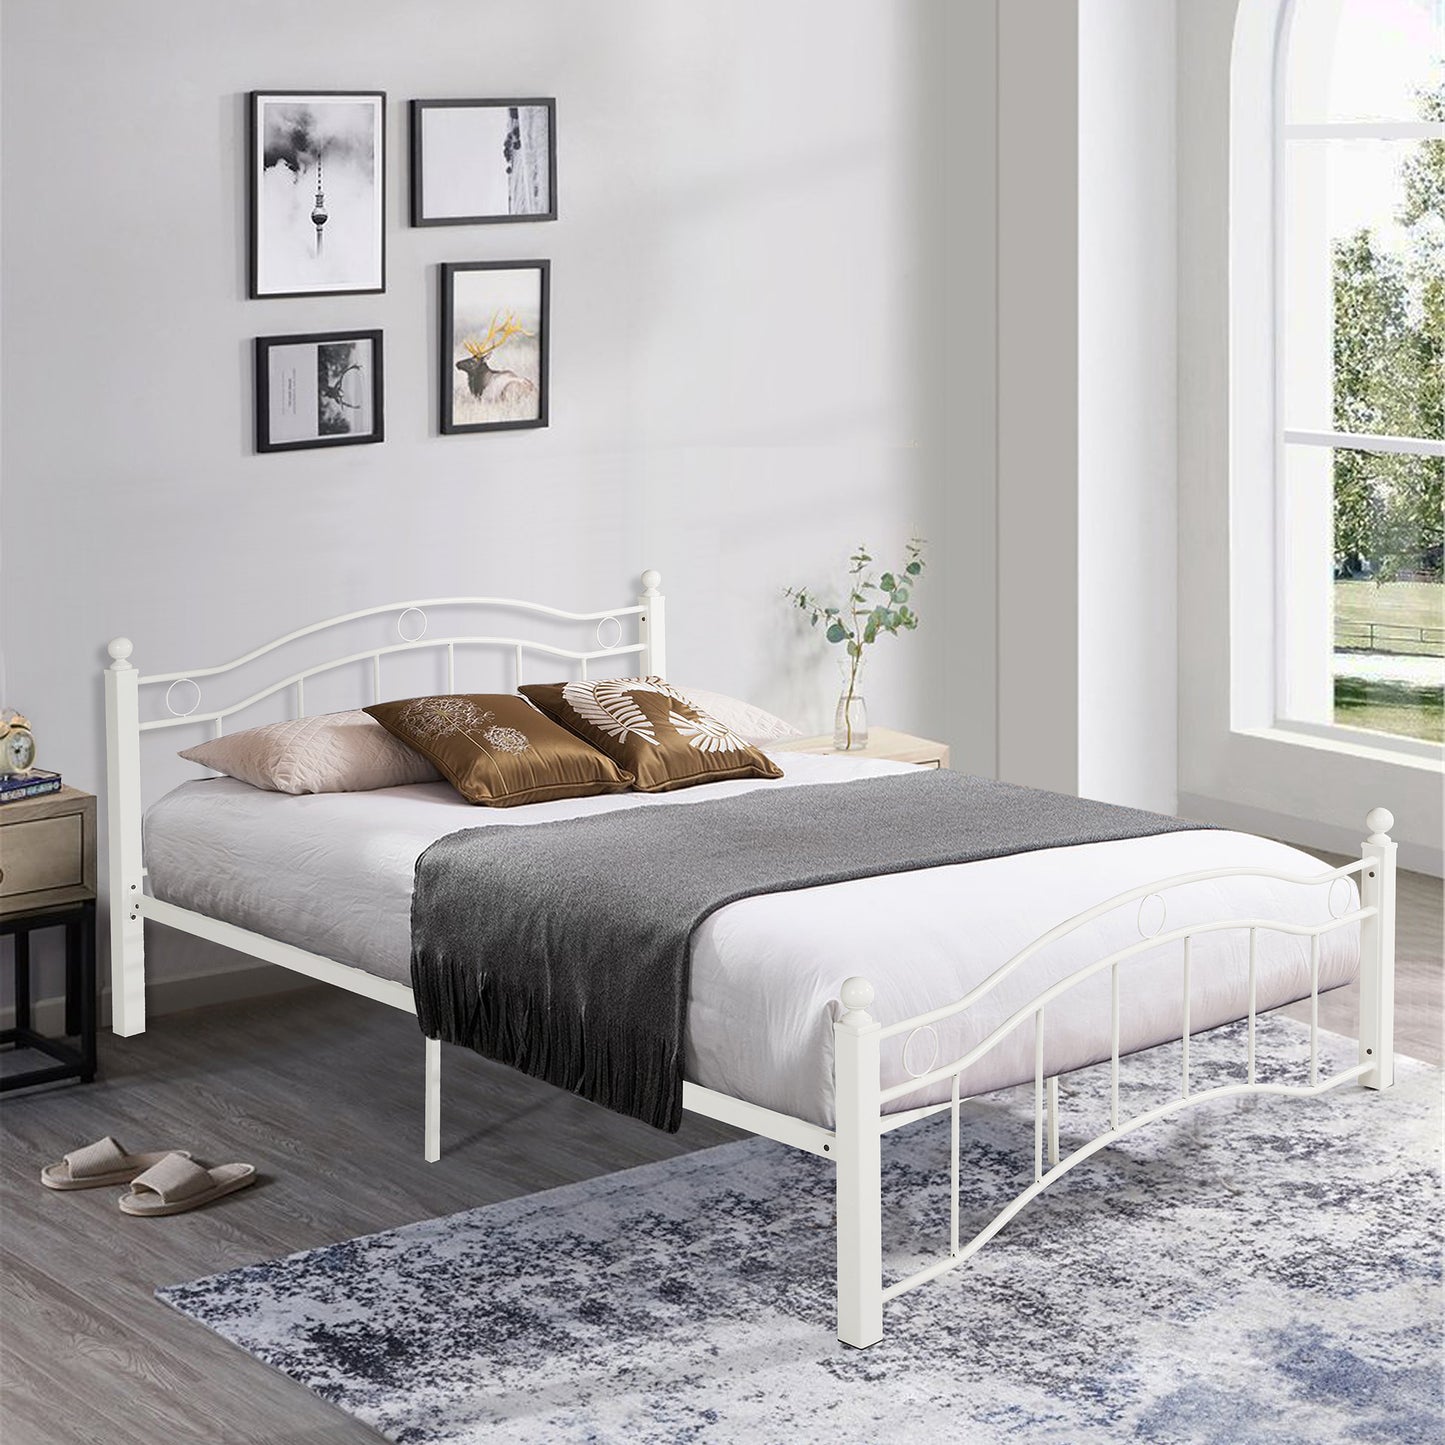 Queen Size Metal Platform Bed Frame with Headboard and Footboard - White